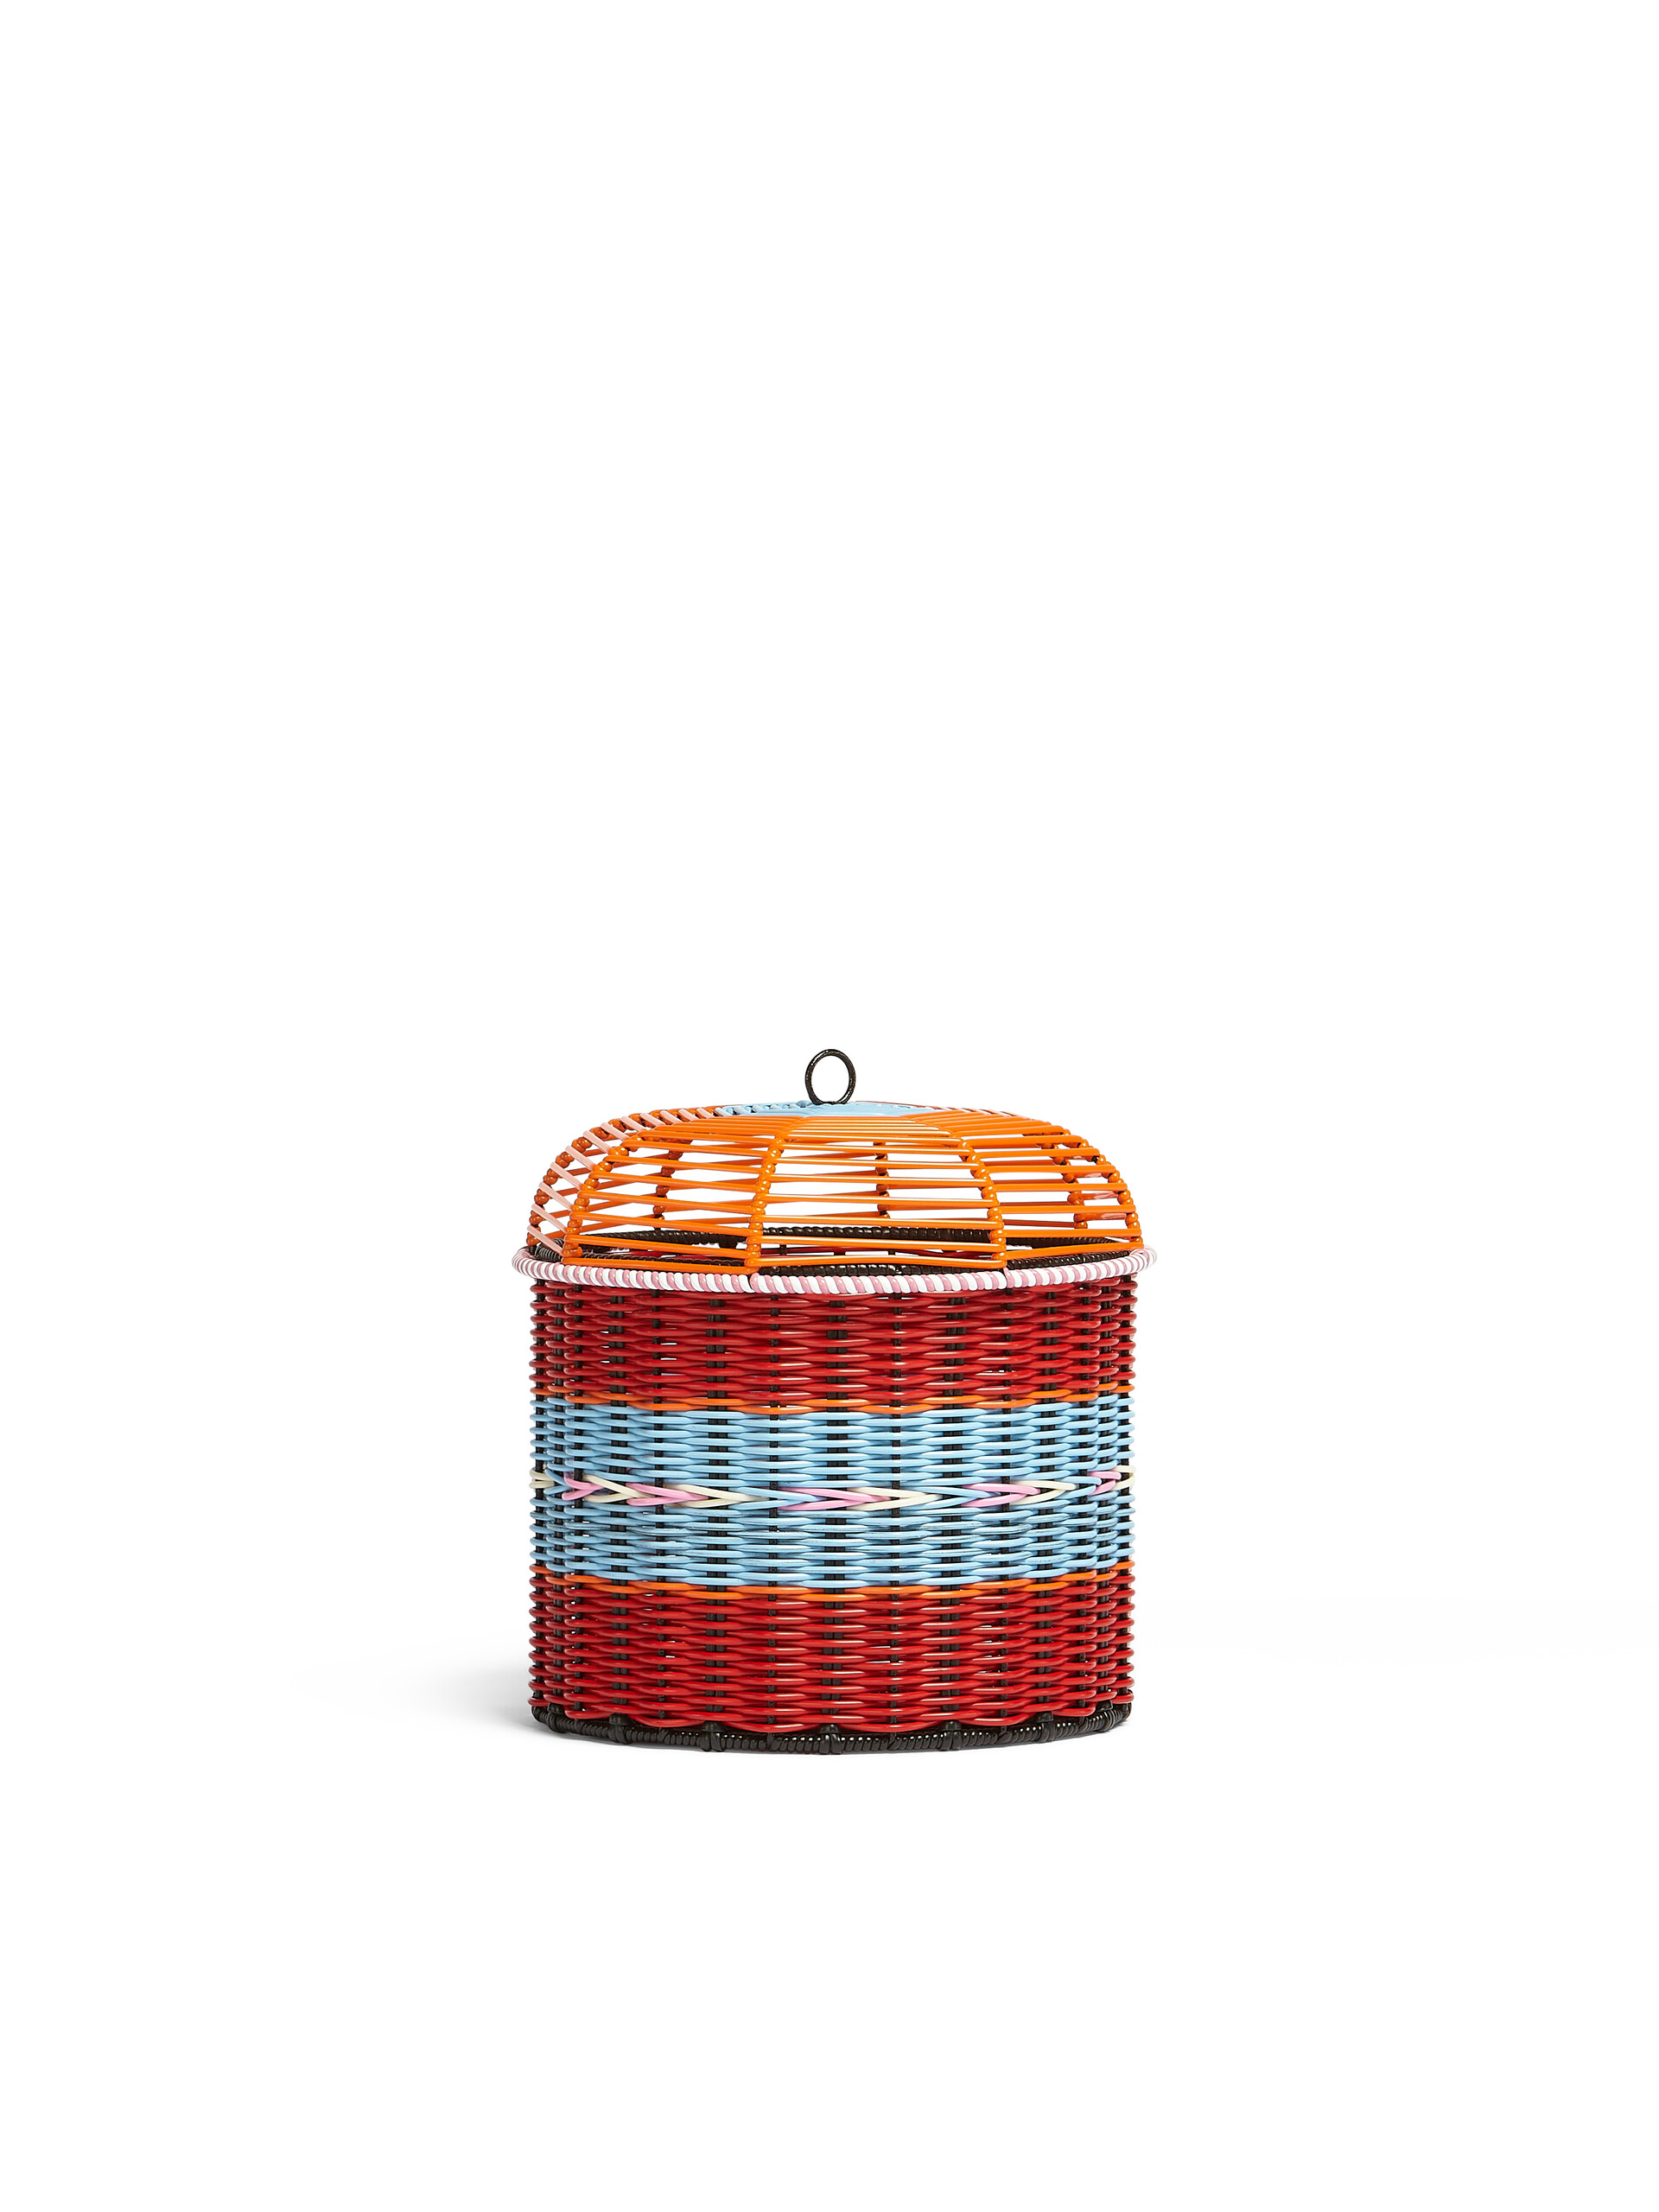 Medium MARNI MARKET case in iron and red PVC - Home Accessories - Image 2